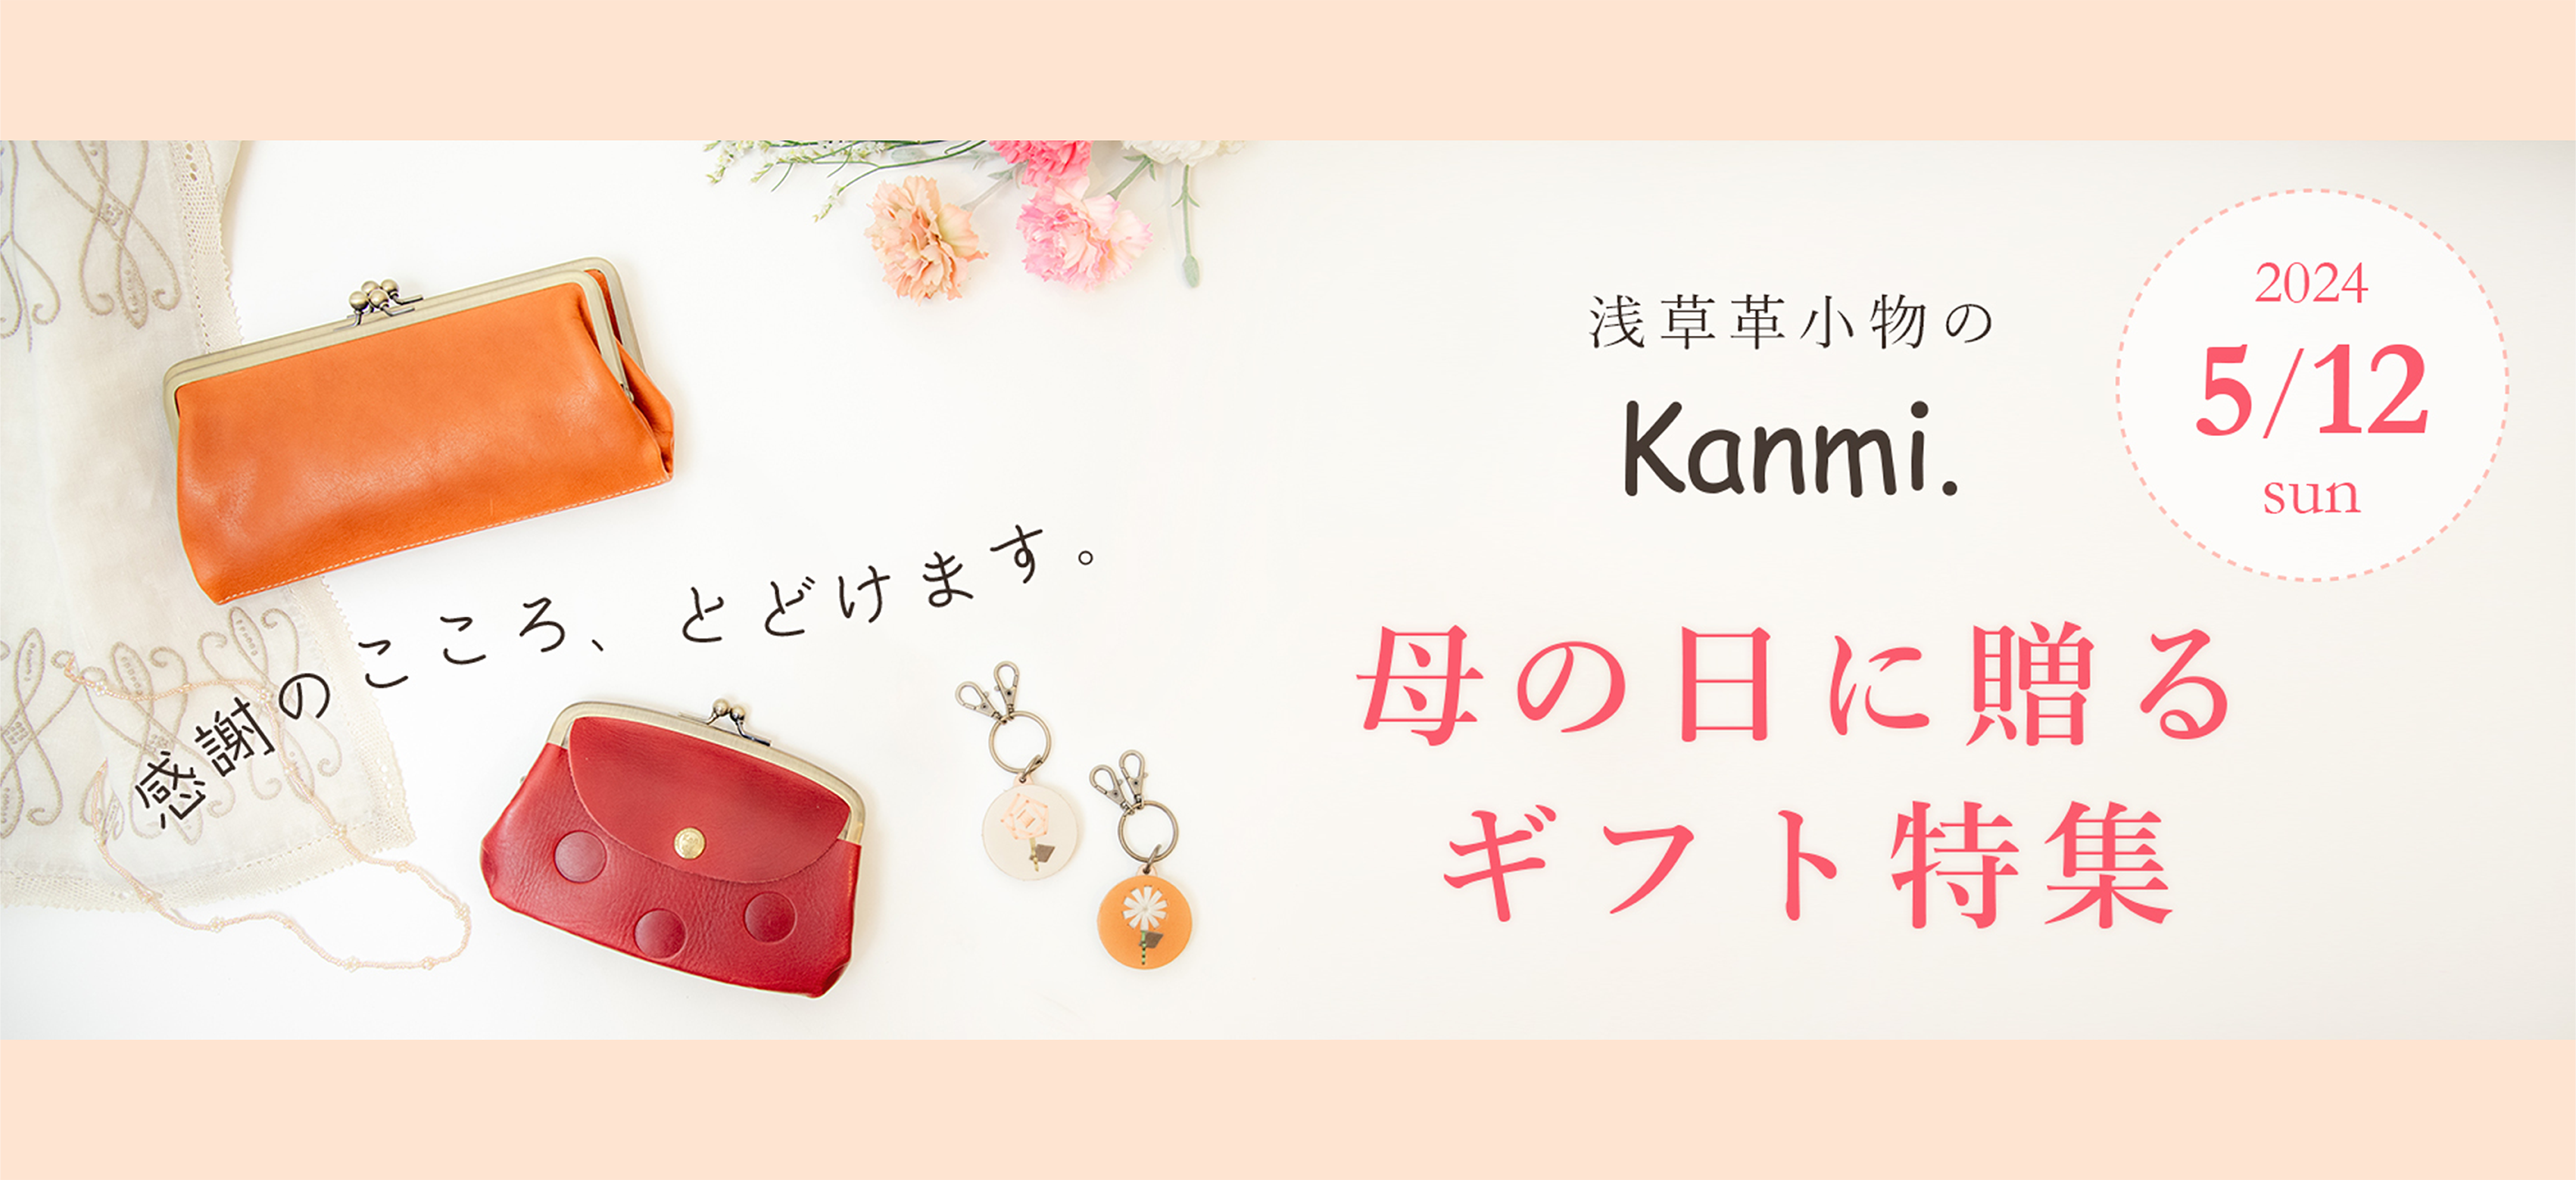 Kanmiの母の日フェア